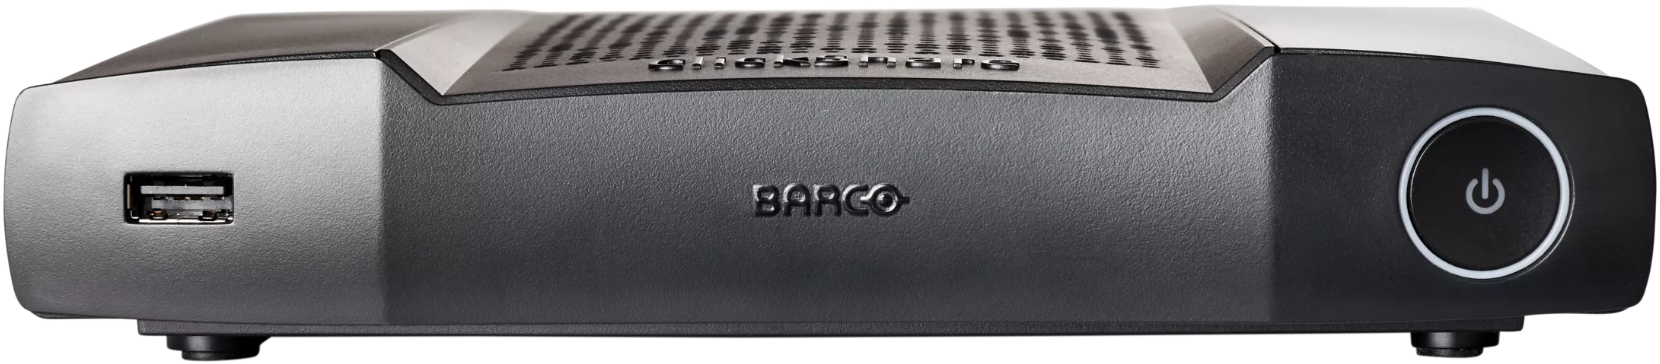 Which USB-C to HDMI OUT convertor are known to work with the CX-50 Gen2? -  Barco